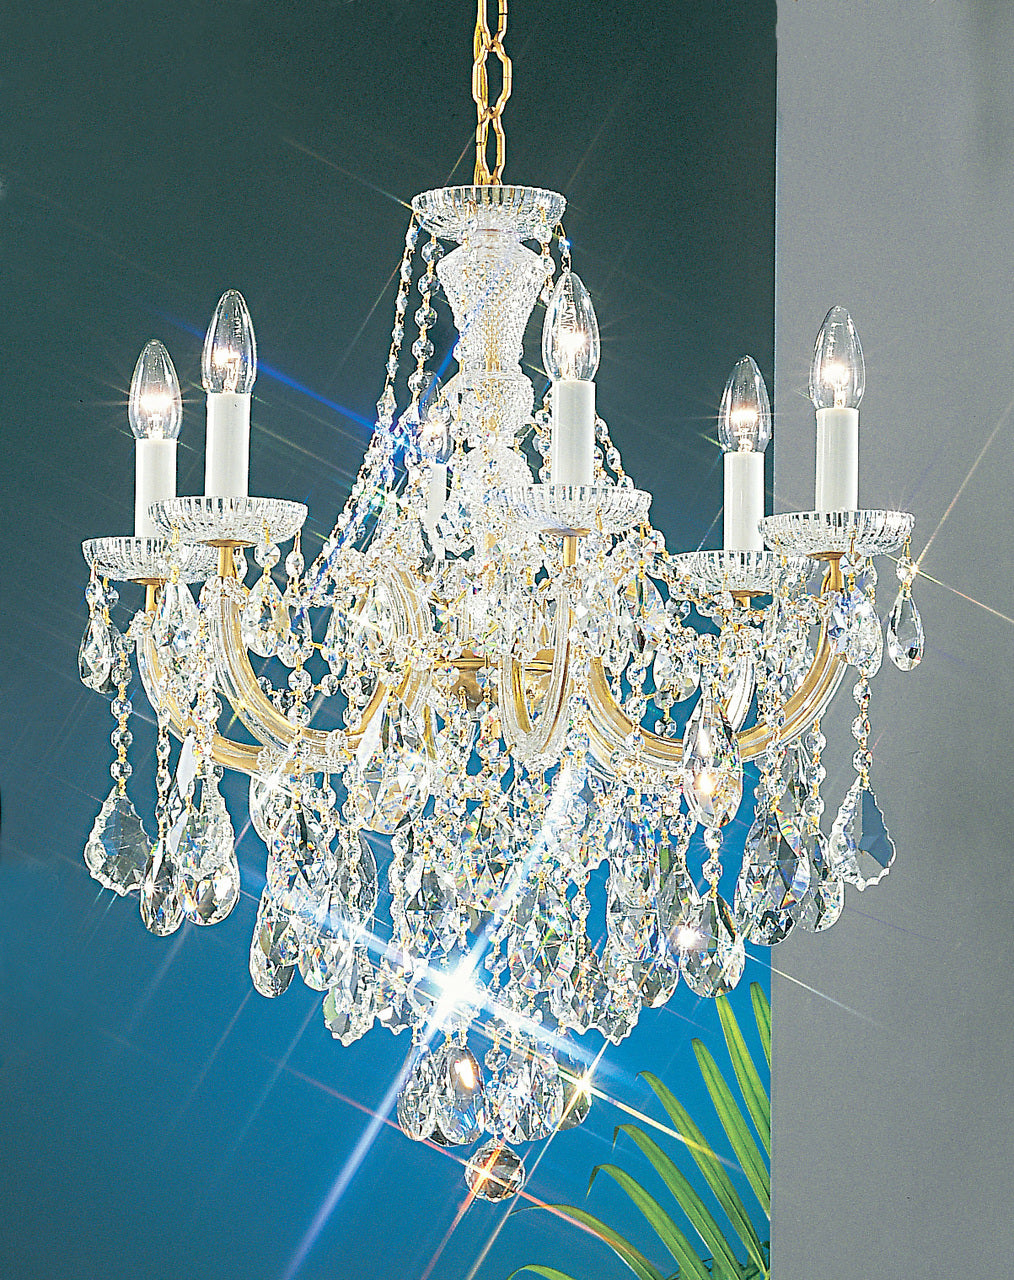 Classic Lighting 8121 OWG S Maria Theresa Traditional Crystal Chandelier in Olde World Gold (Imported from Italy)